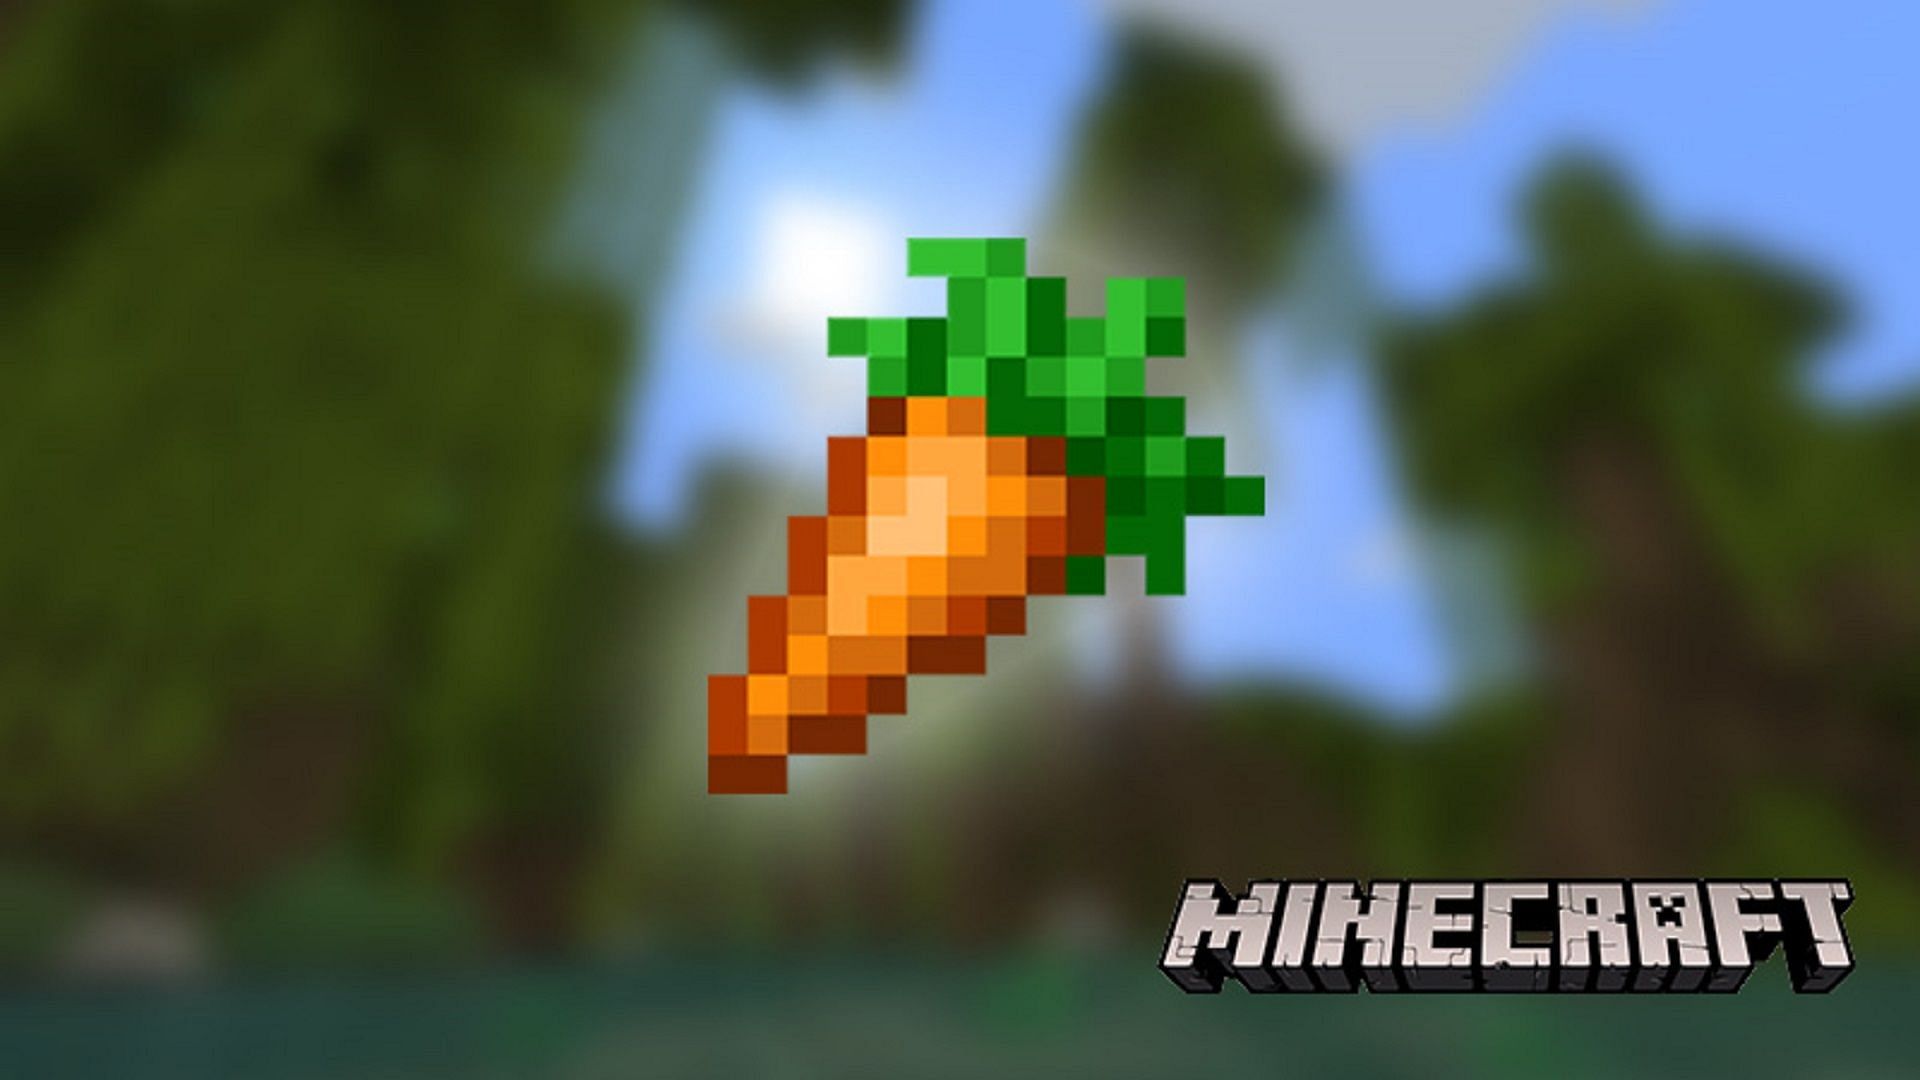 A potentially carrot-related bug recently led to the end of a Minecraft Redditor